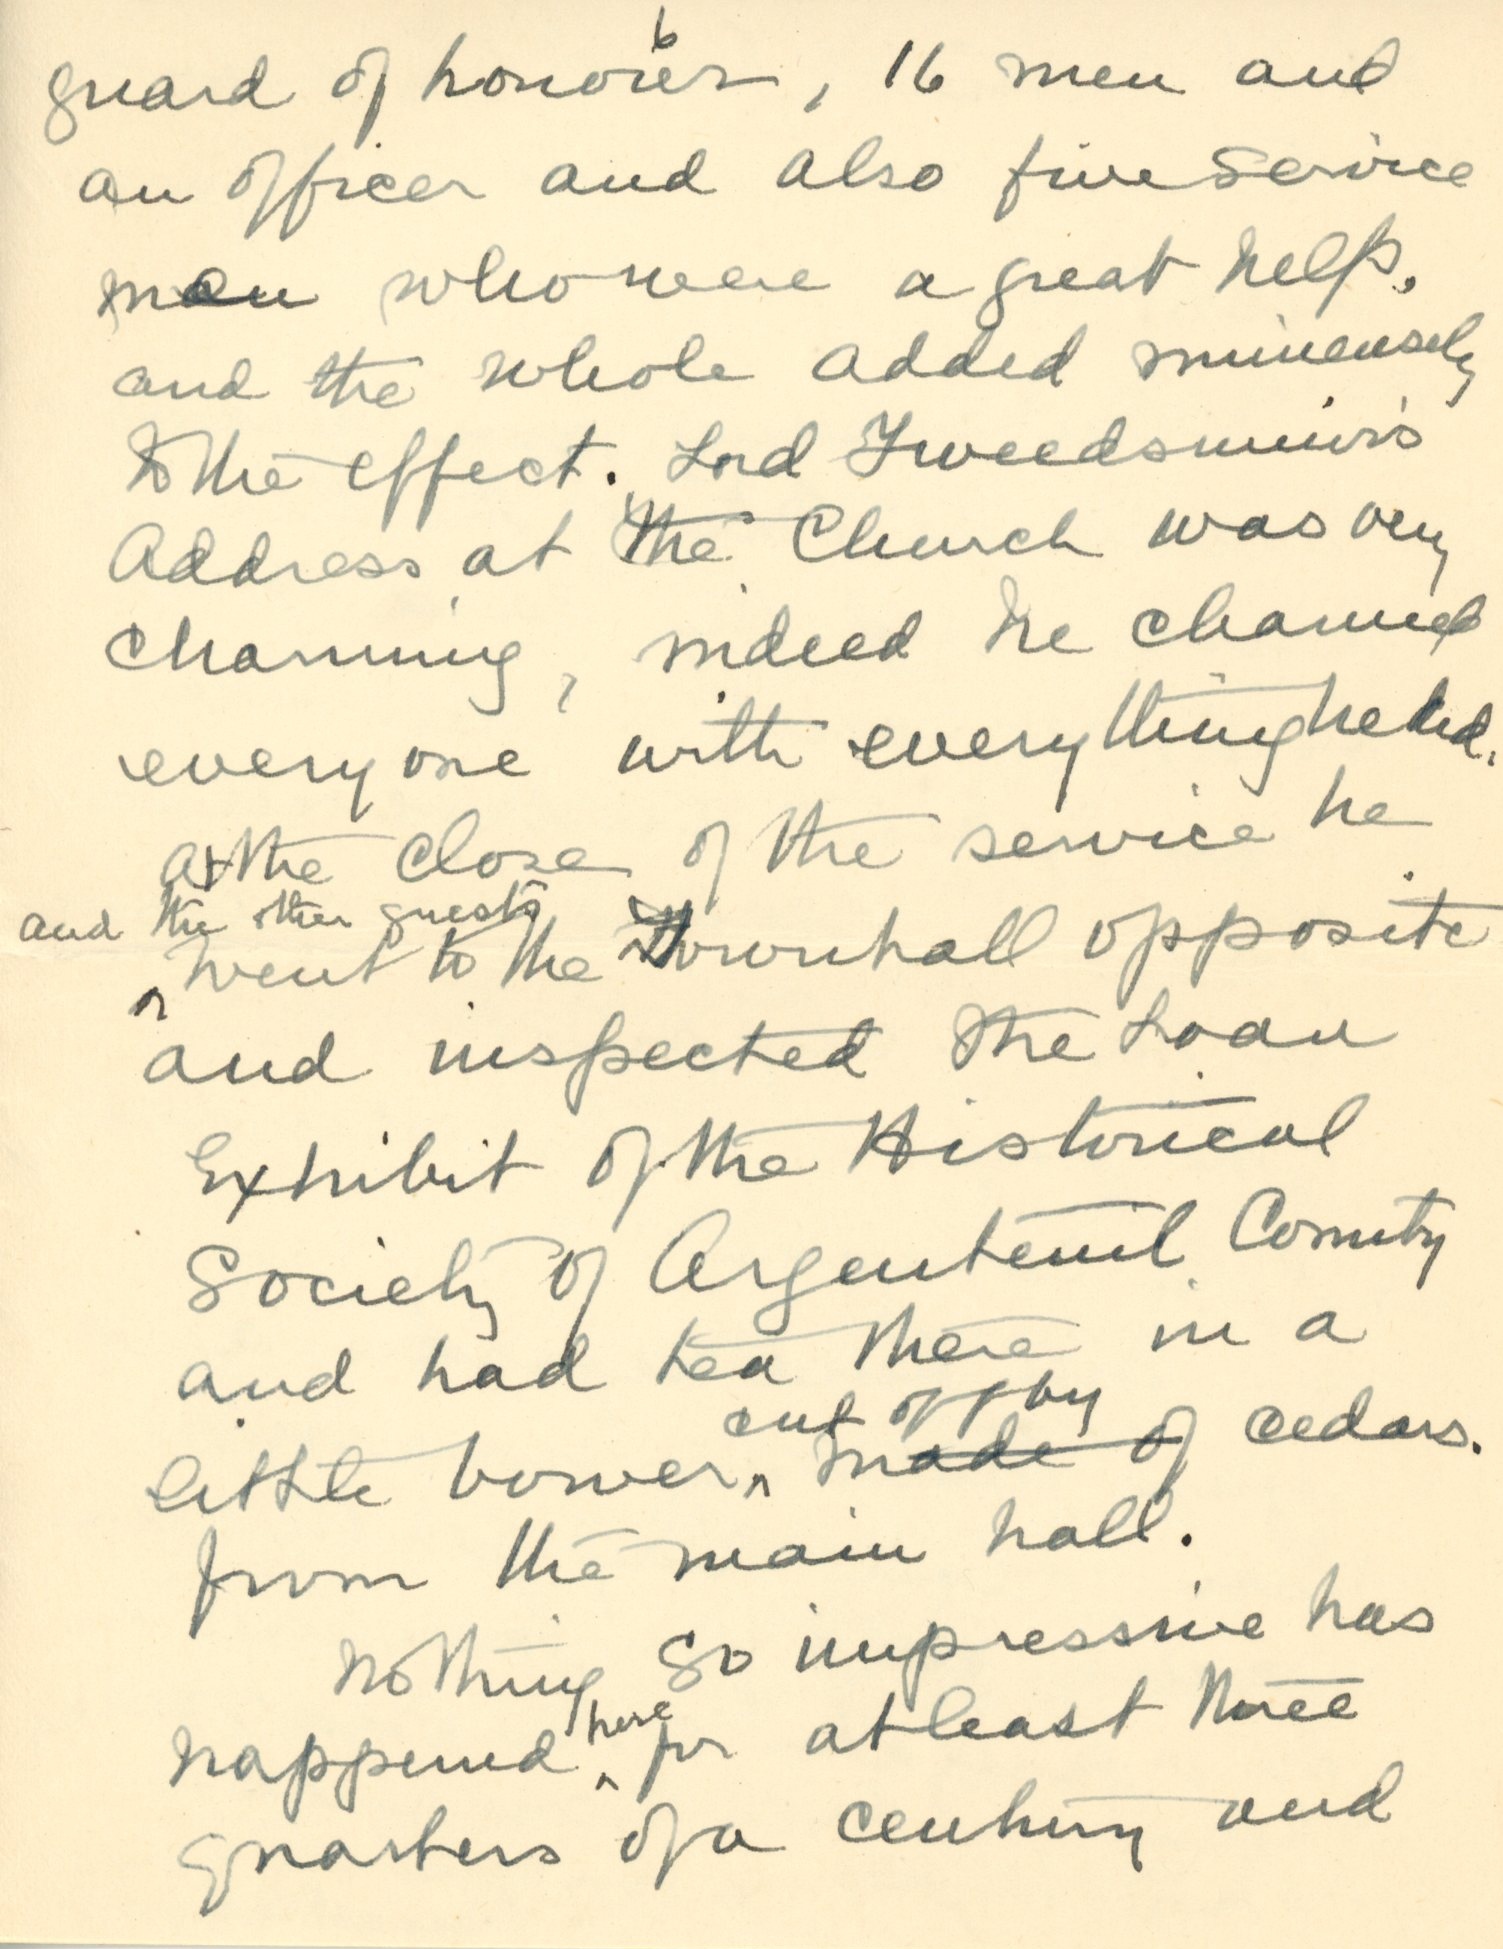 Handwritten letter from Maude Abbott to former prime minister R. B. Bennett (Richard Bedford Bennett) dated October 13, 1936, black ink on sepia paper. She describes the October 3, 1936 dedication ceremony for the Sir John Joseph Caldwell Abbott memorial. She says she is pleased with the enthusiasm of the people of the region for the event, and thanks the former prime minister for his interest and help in organizing it.